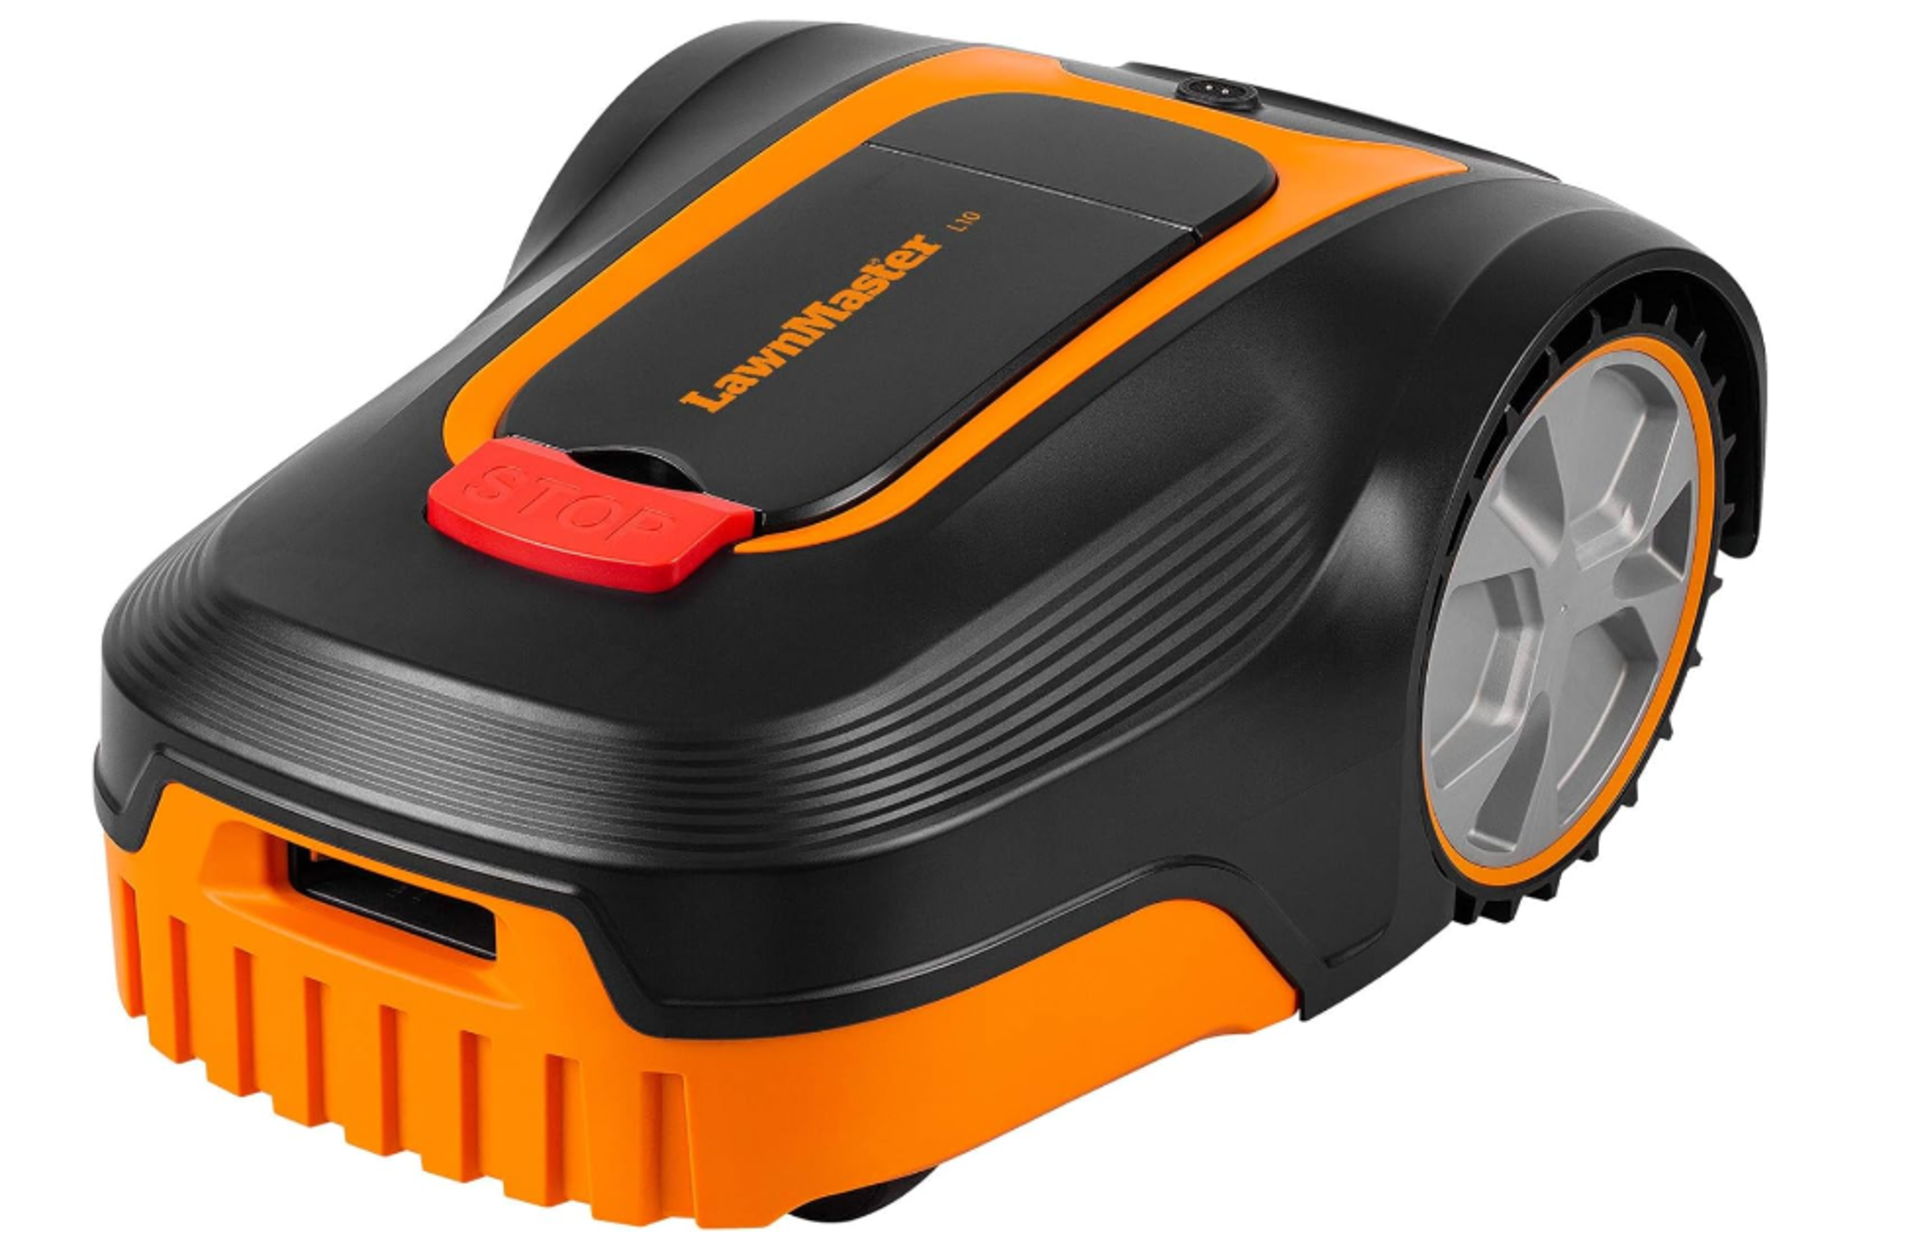 Cleva LawnMaster L10 Robot Lawn Mower - Up to 400m2- No Battery RRP 360.00 About the Product(s)